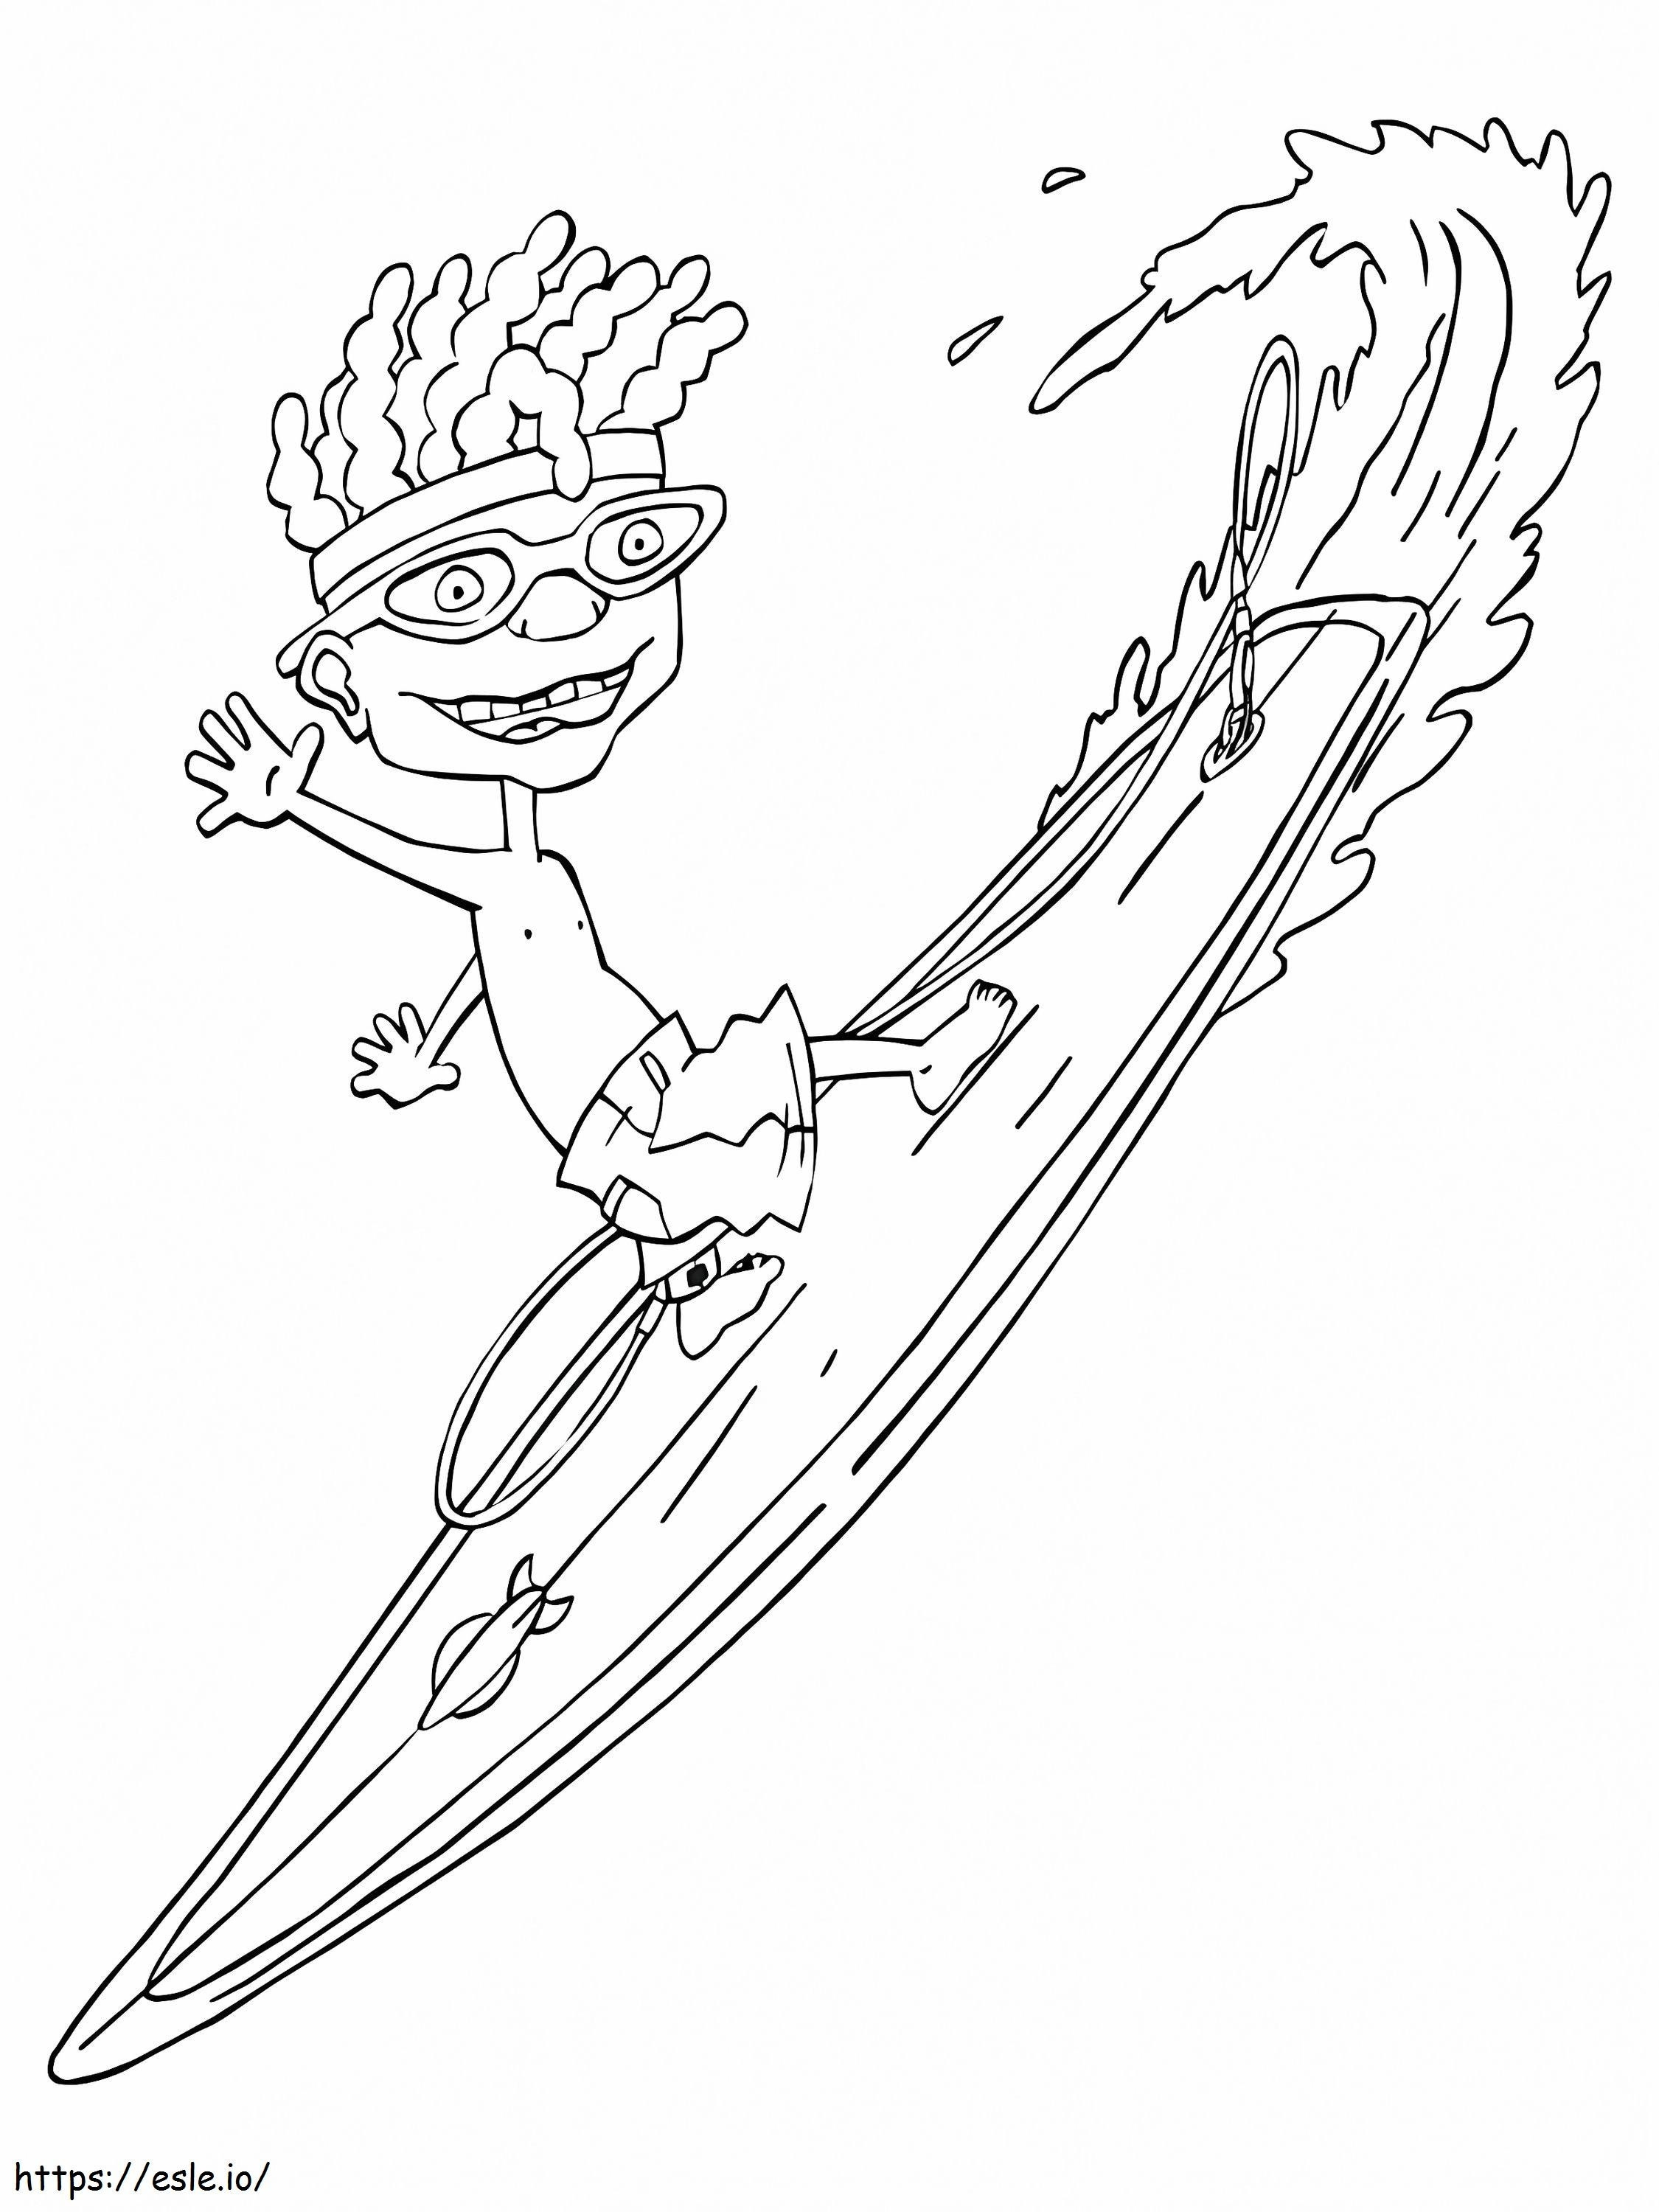 Rocket Power 12 coloring page